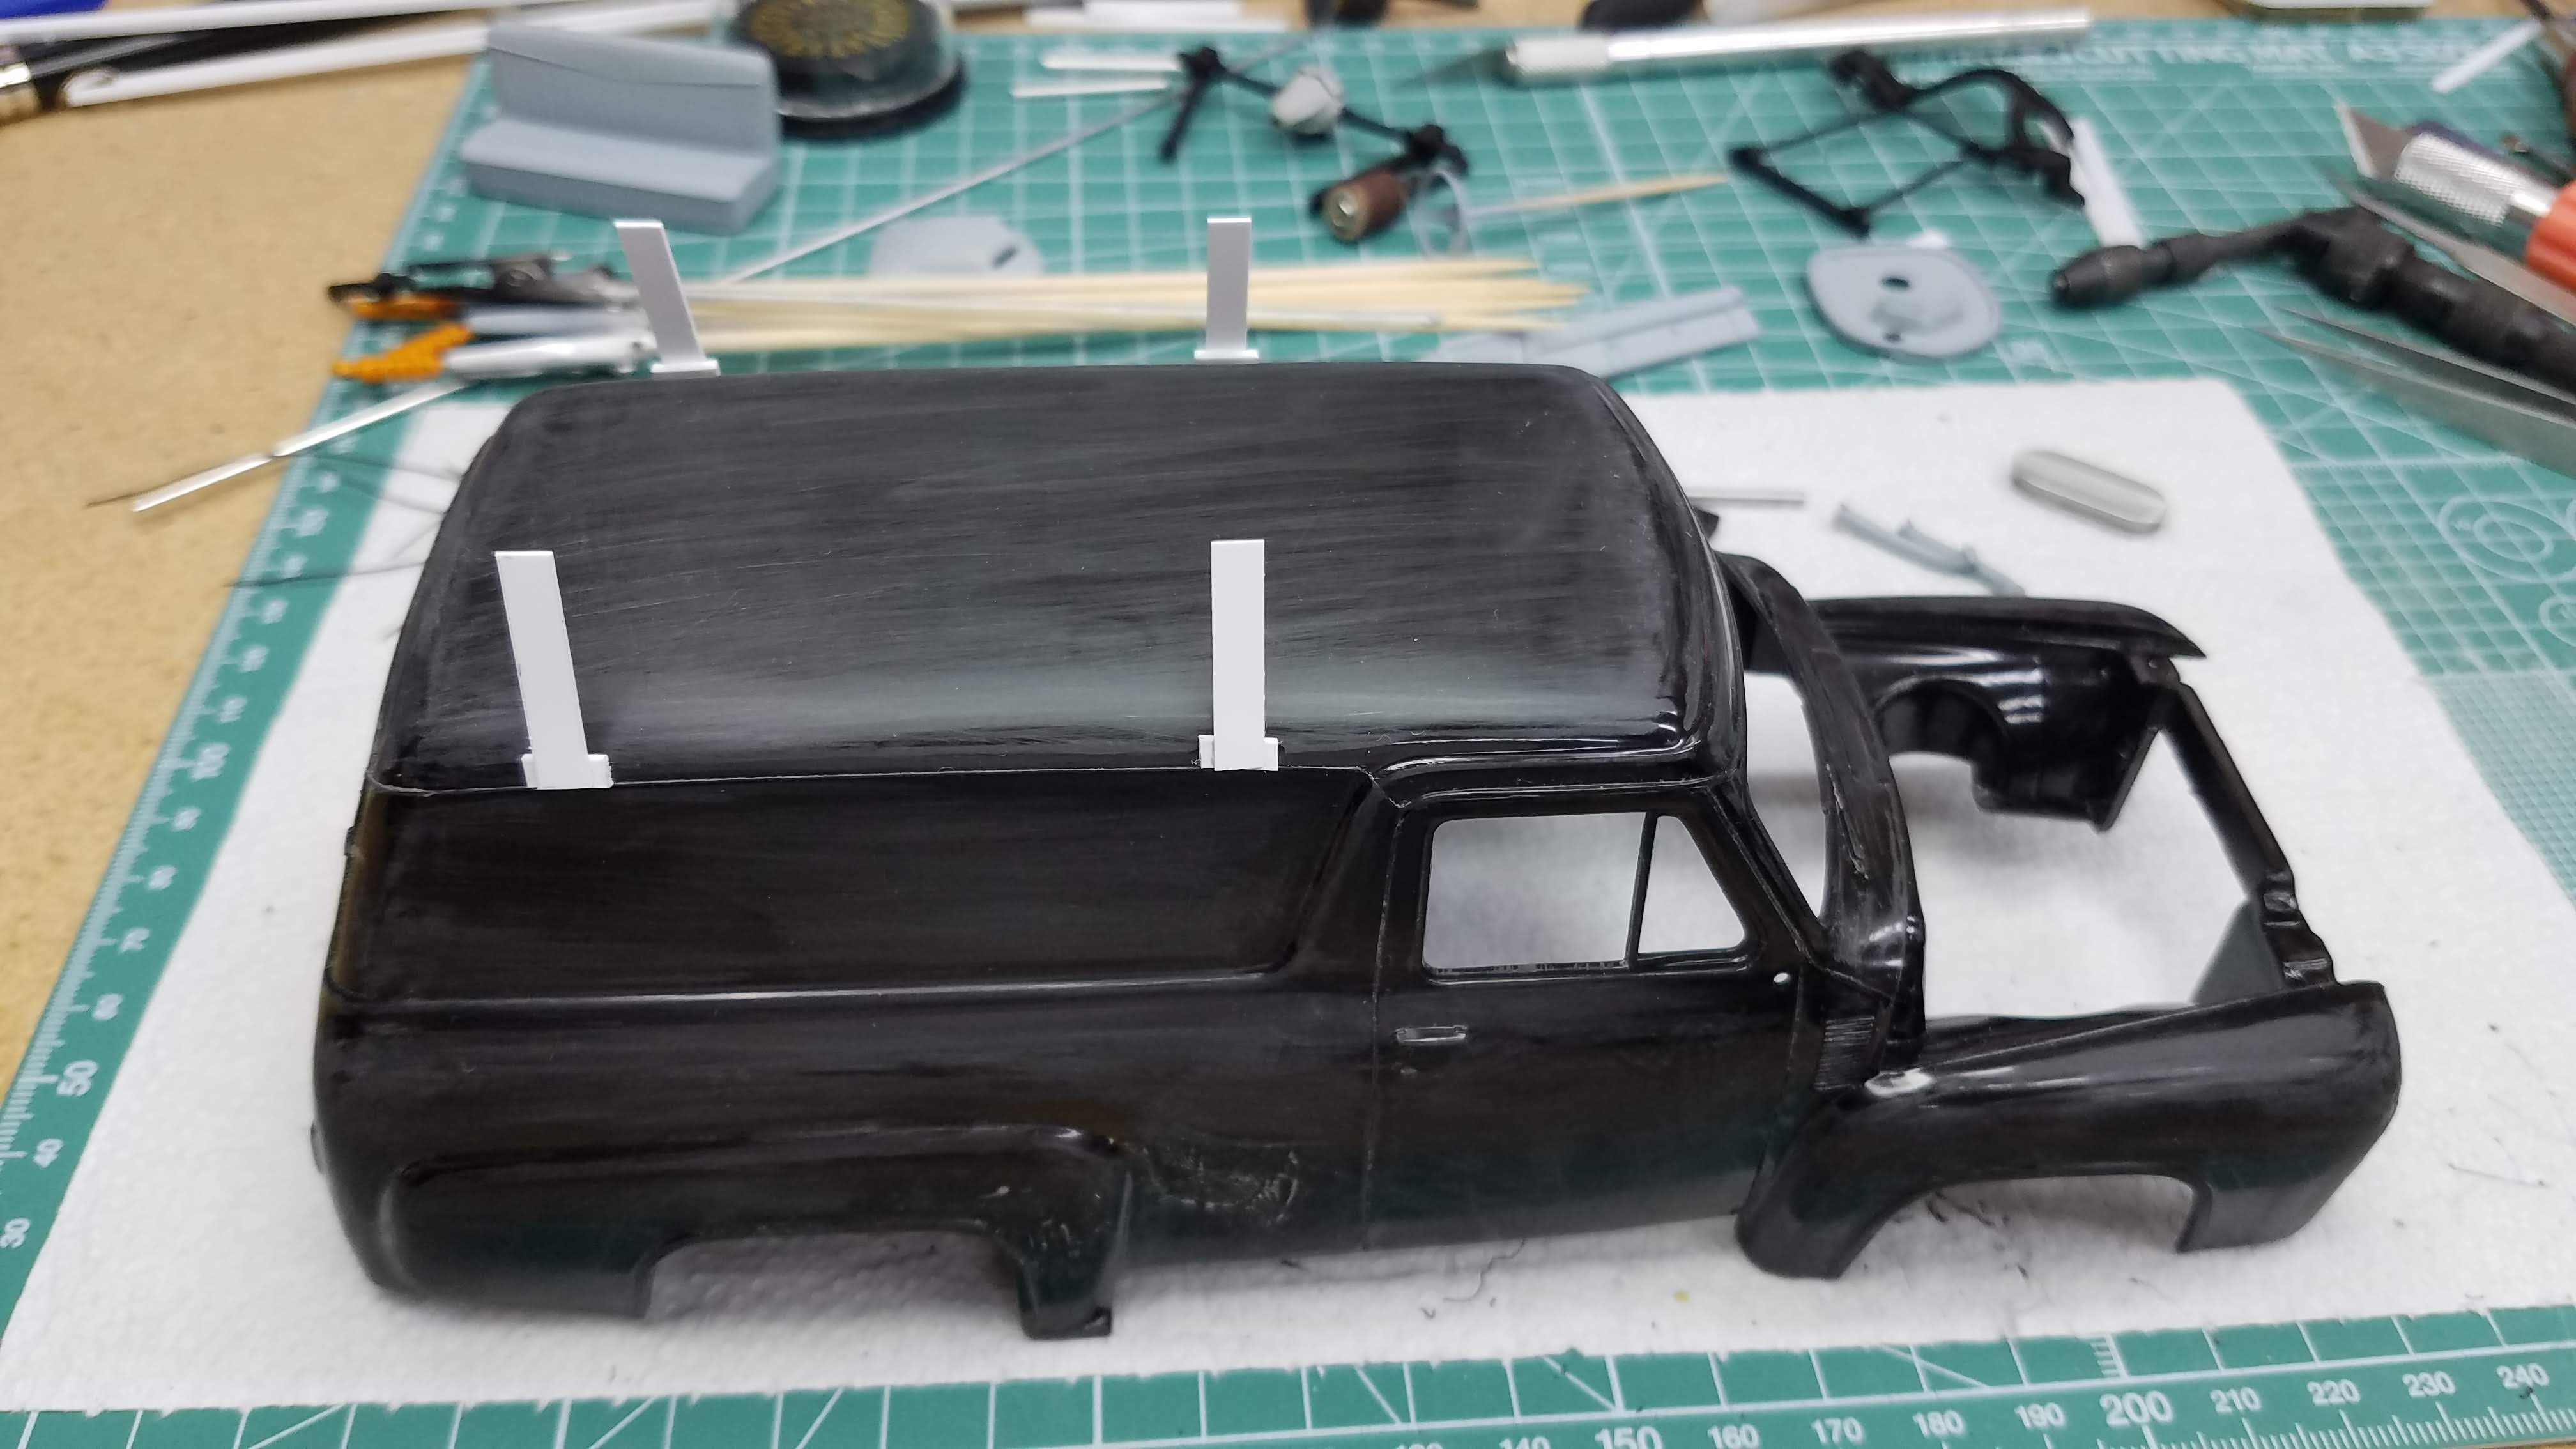 Body sanded and roof rack uprights are installed